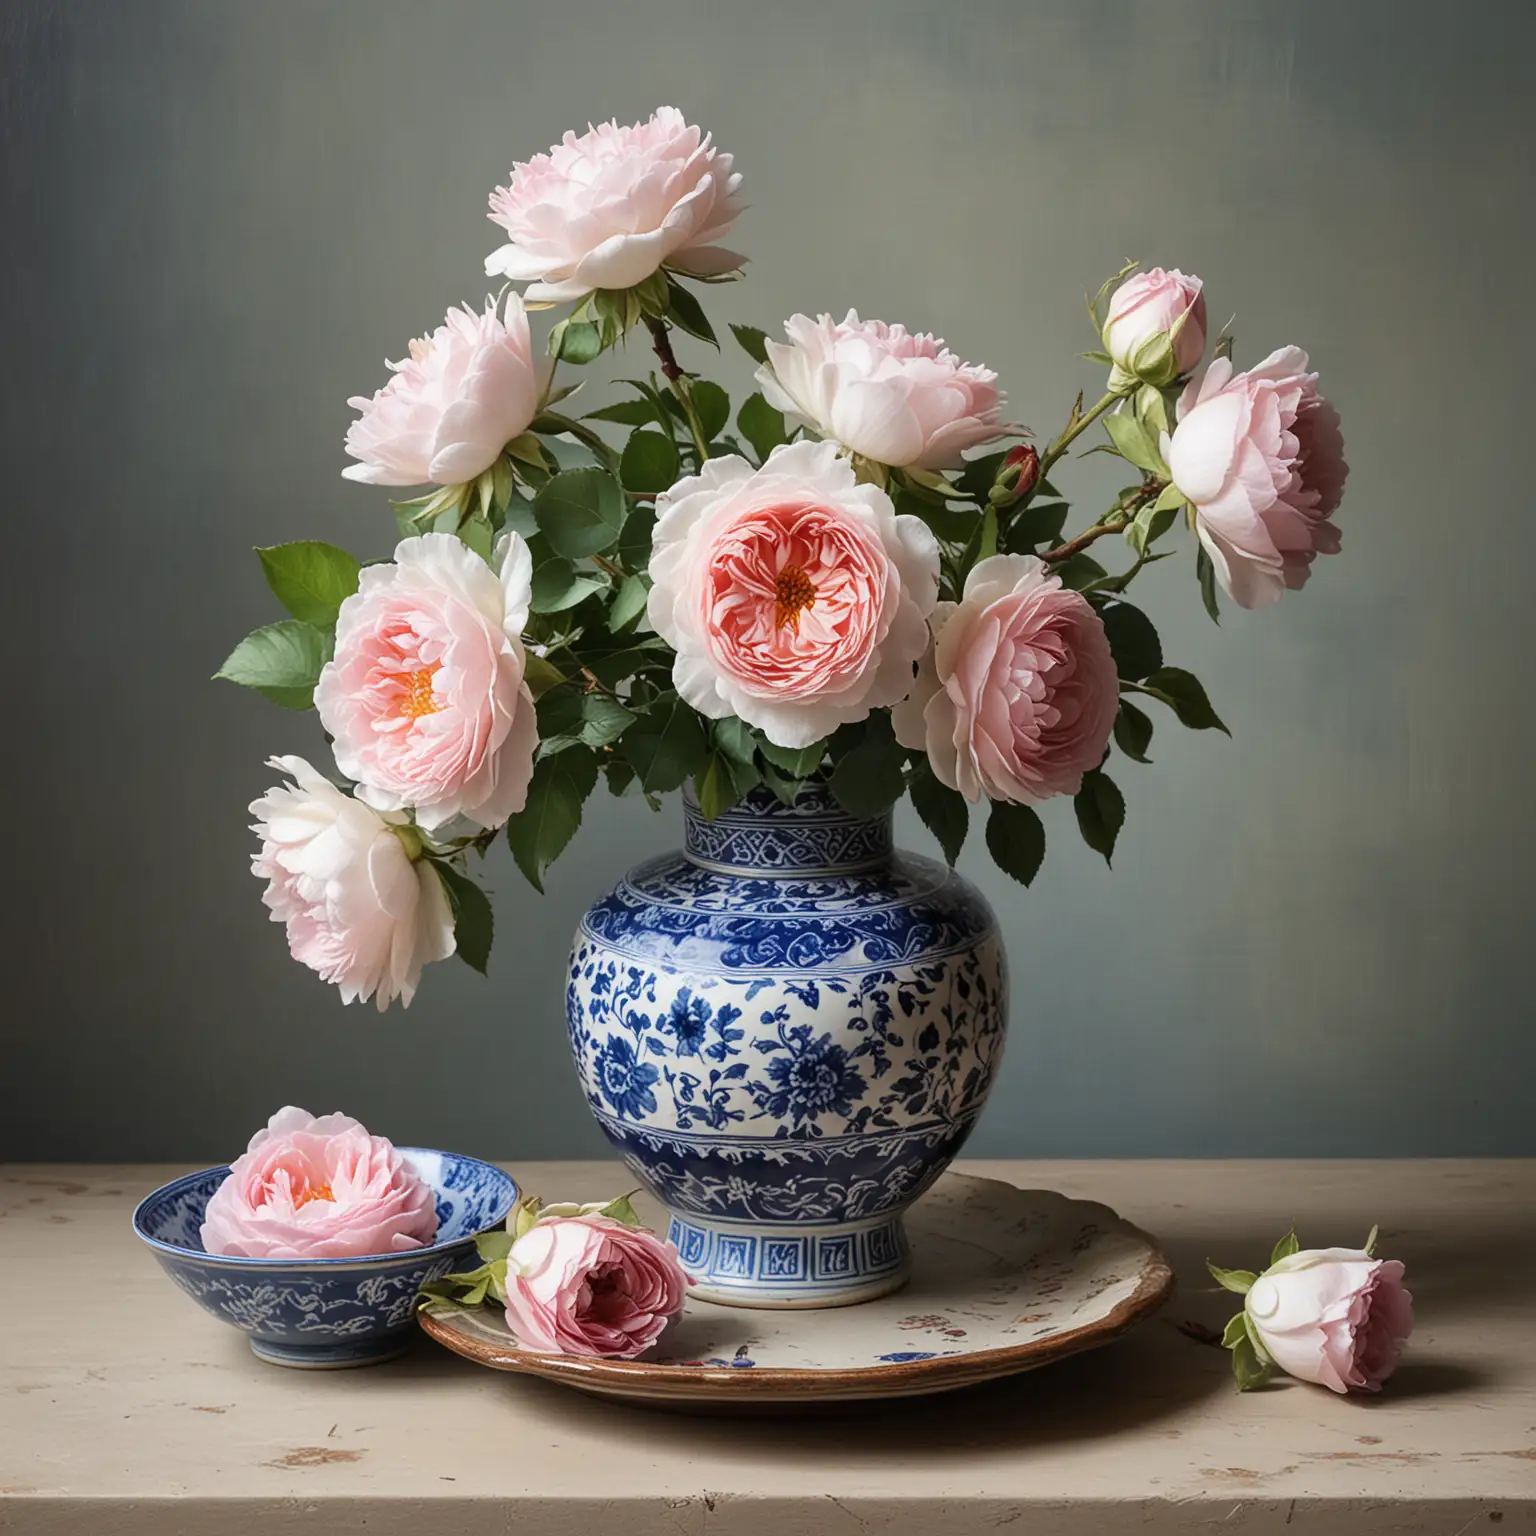 A STILL LIFE PAINTING OF A SMALL BOQUET OF ENGLISH ROSES IN A ROUND ASIAN STYLE BLUE AND WHITE VASE, WITH ONE ROSE LYING ON THE TABLE